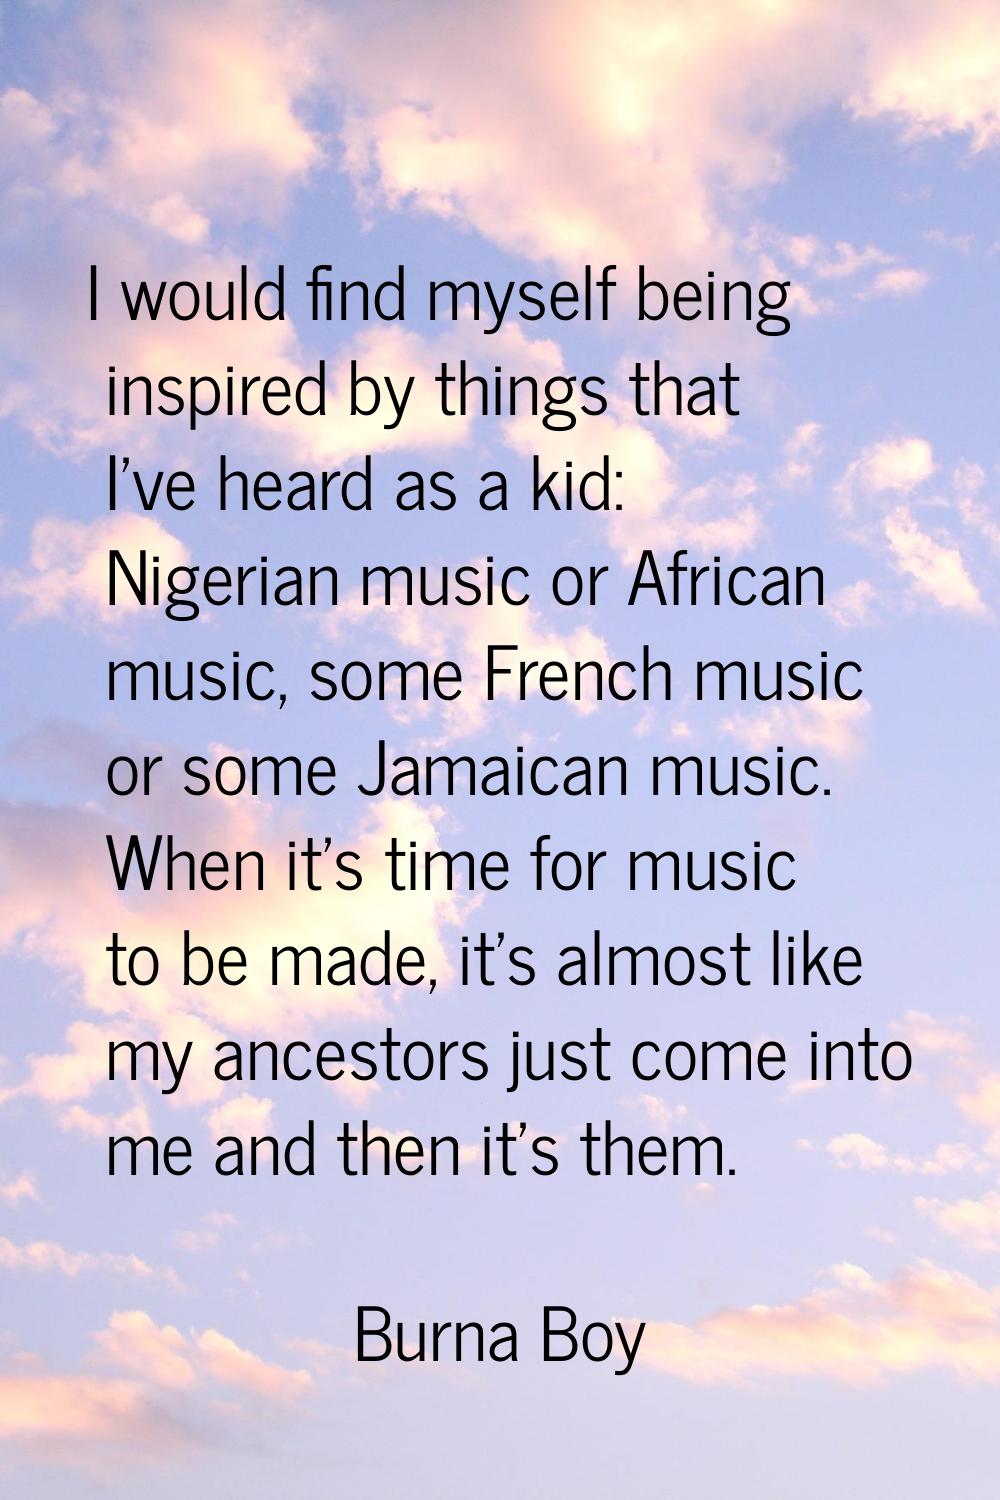 I would find myself being inspired by things that I've heard as a kid: Nigerian music or African mu